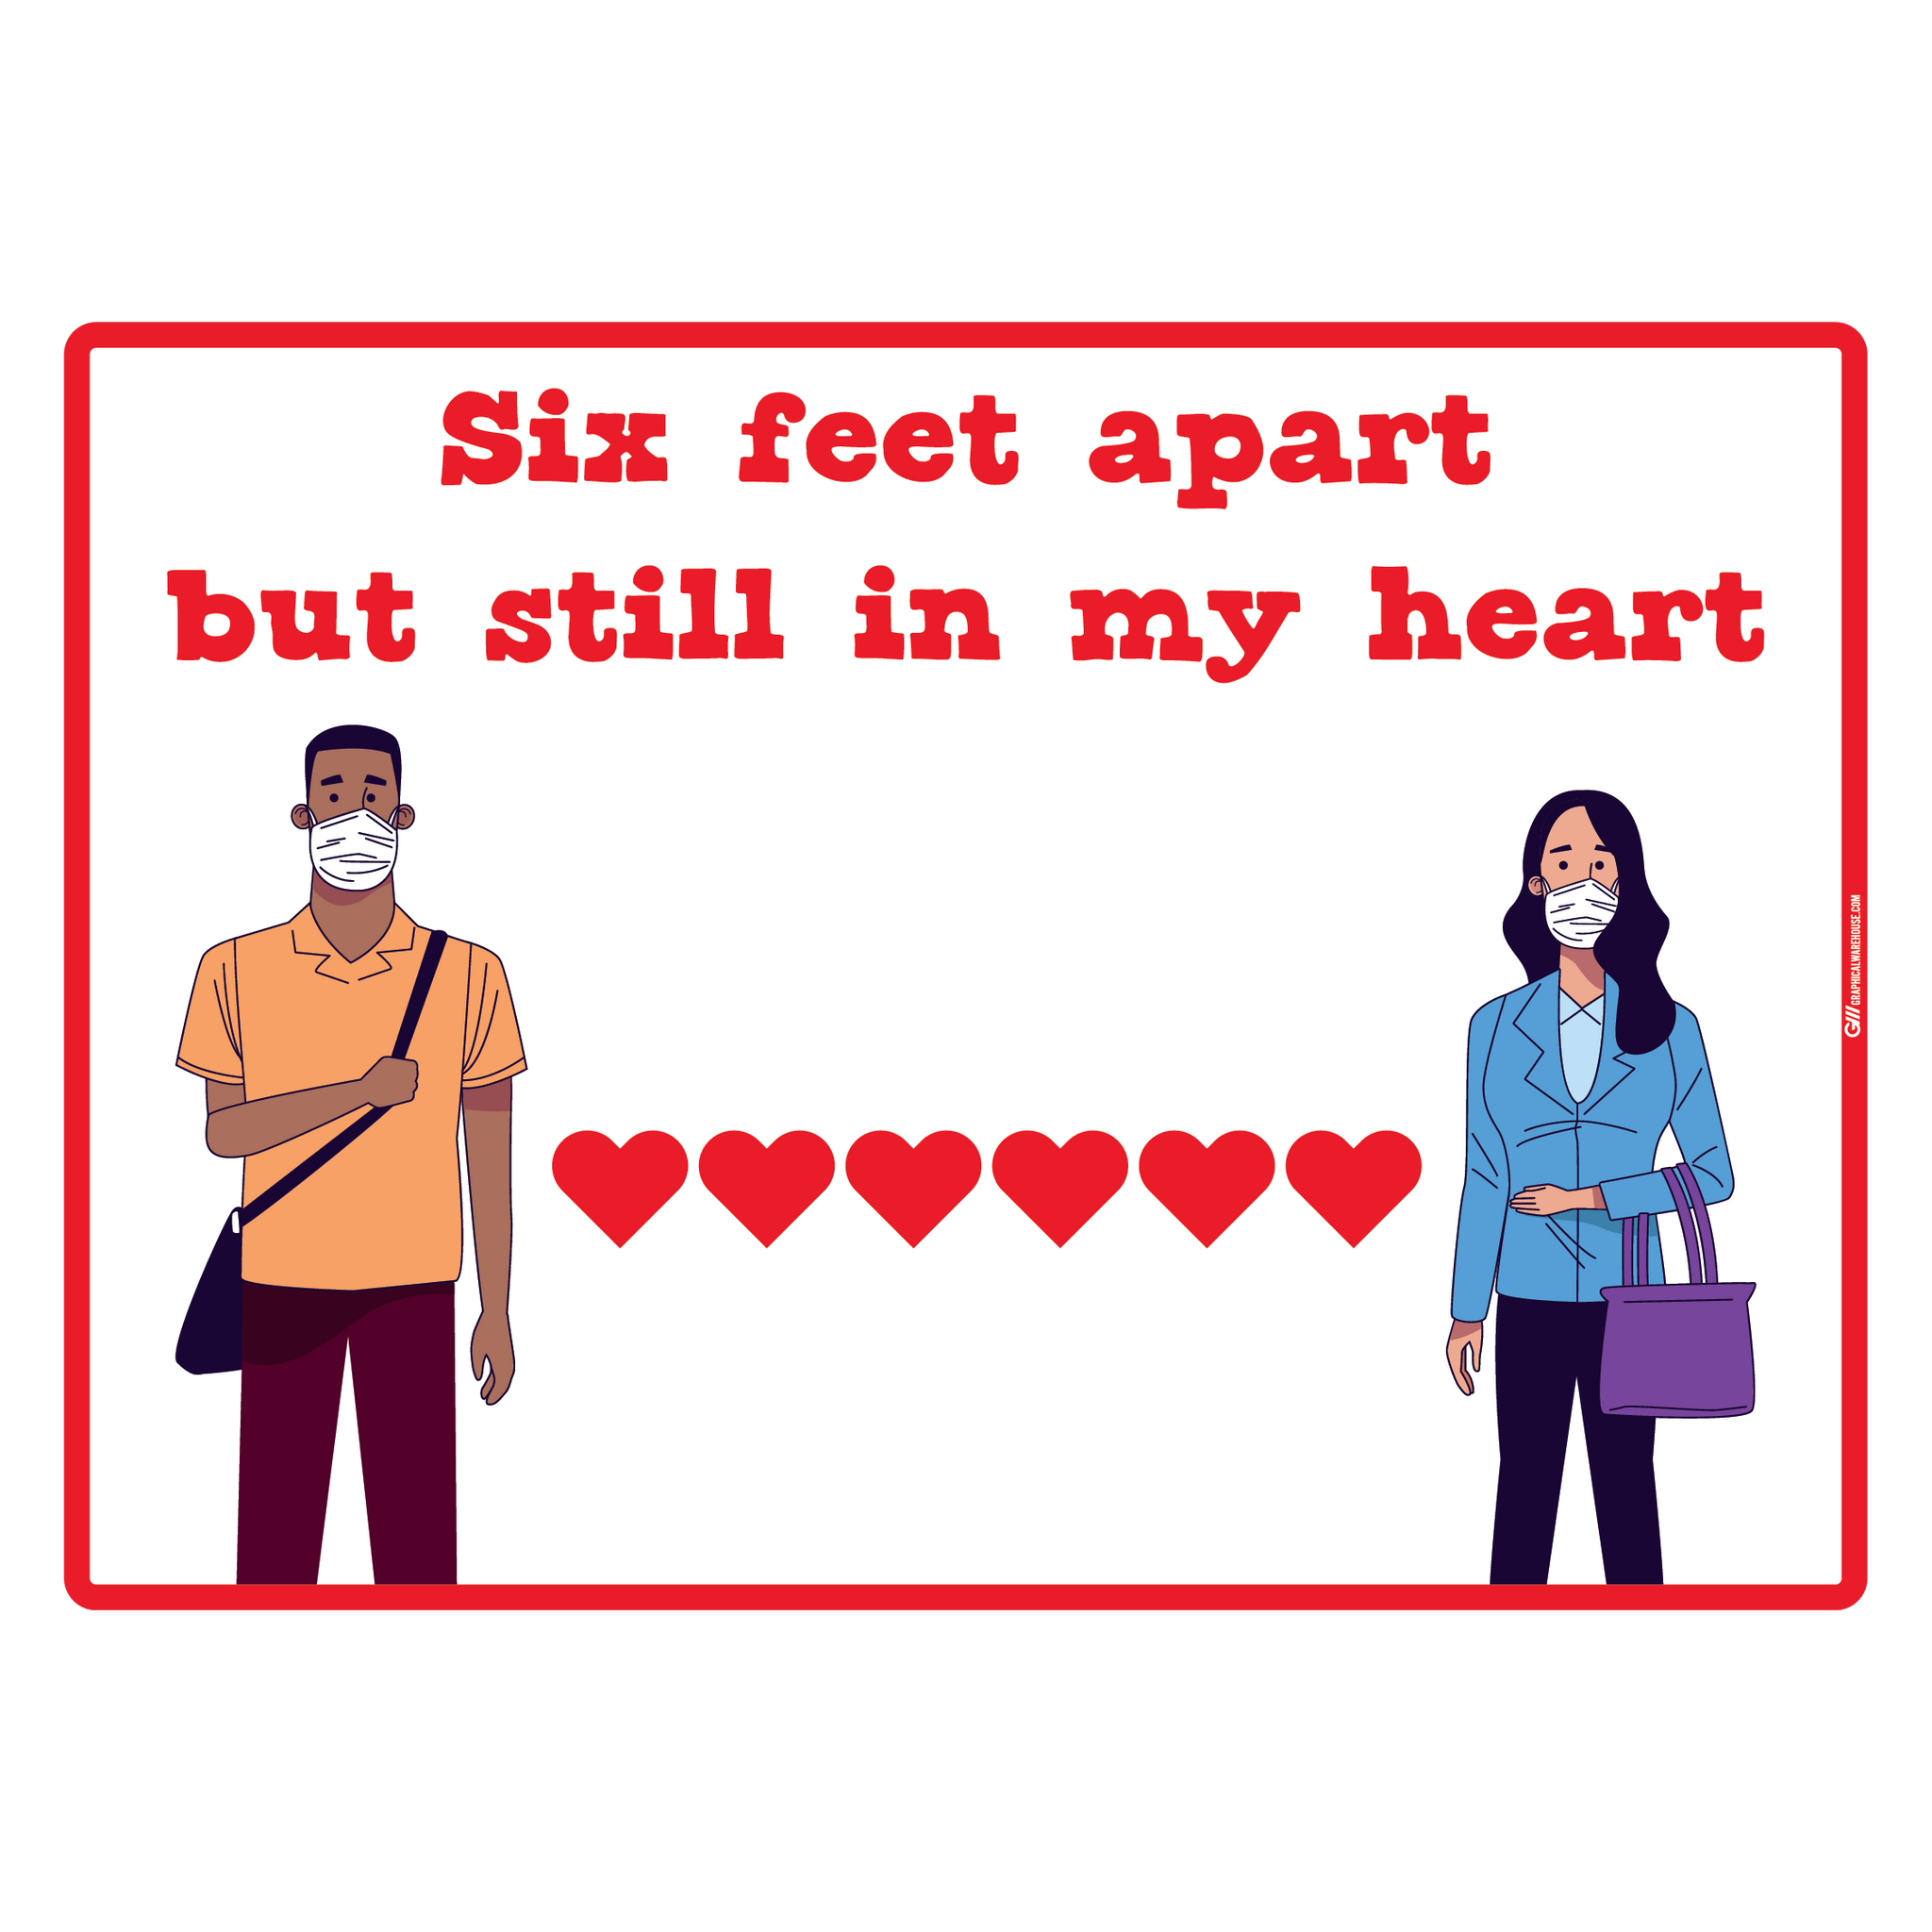 "Valentine's Day, 6 Feet" Adhesive Durable Vinyl Decal- Various Sizes/Colors Available